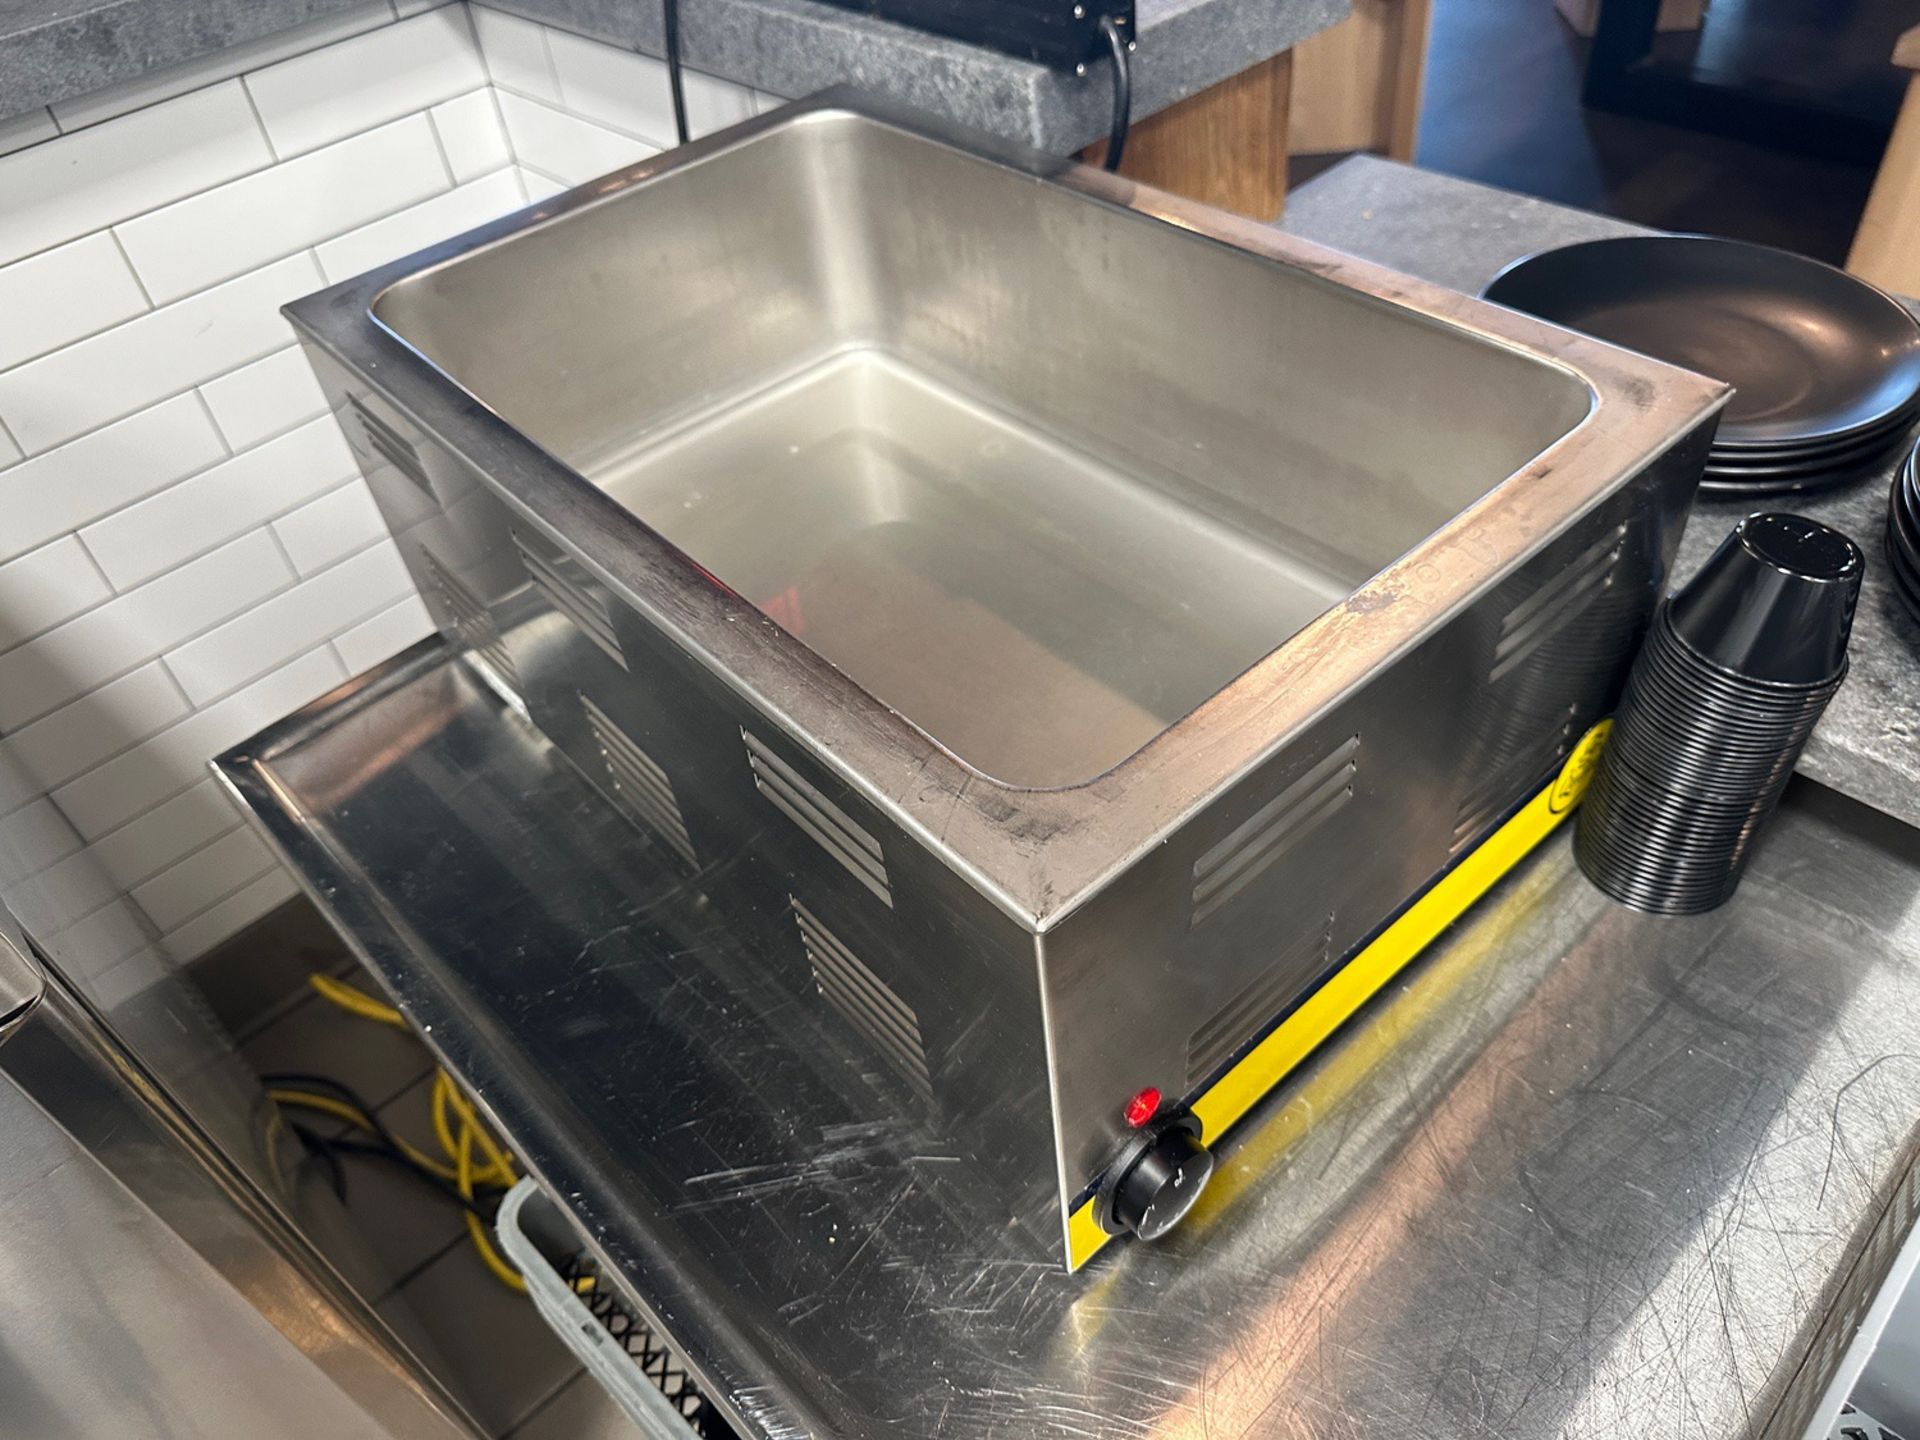 Lot of (3) Stainless Steel Bain Marie